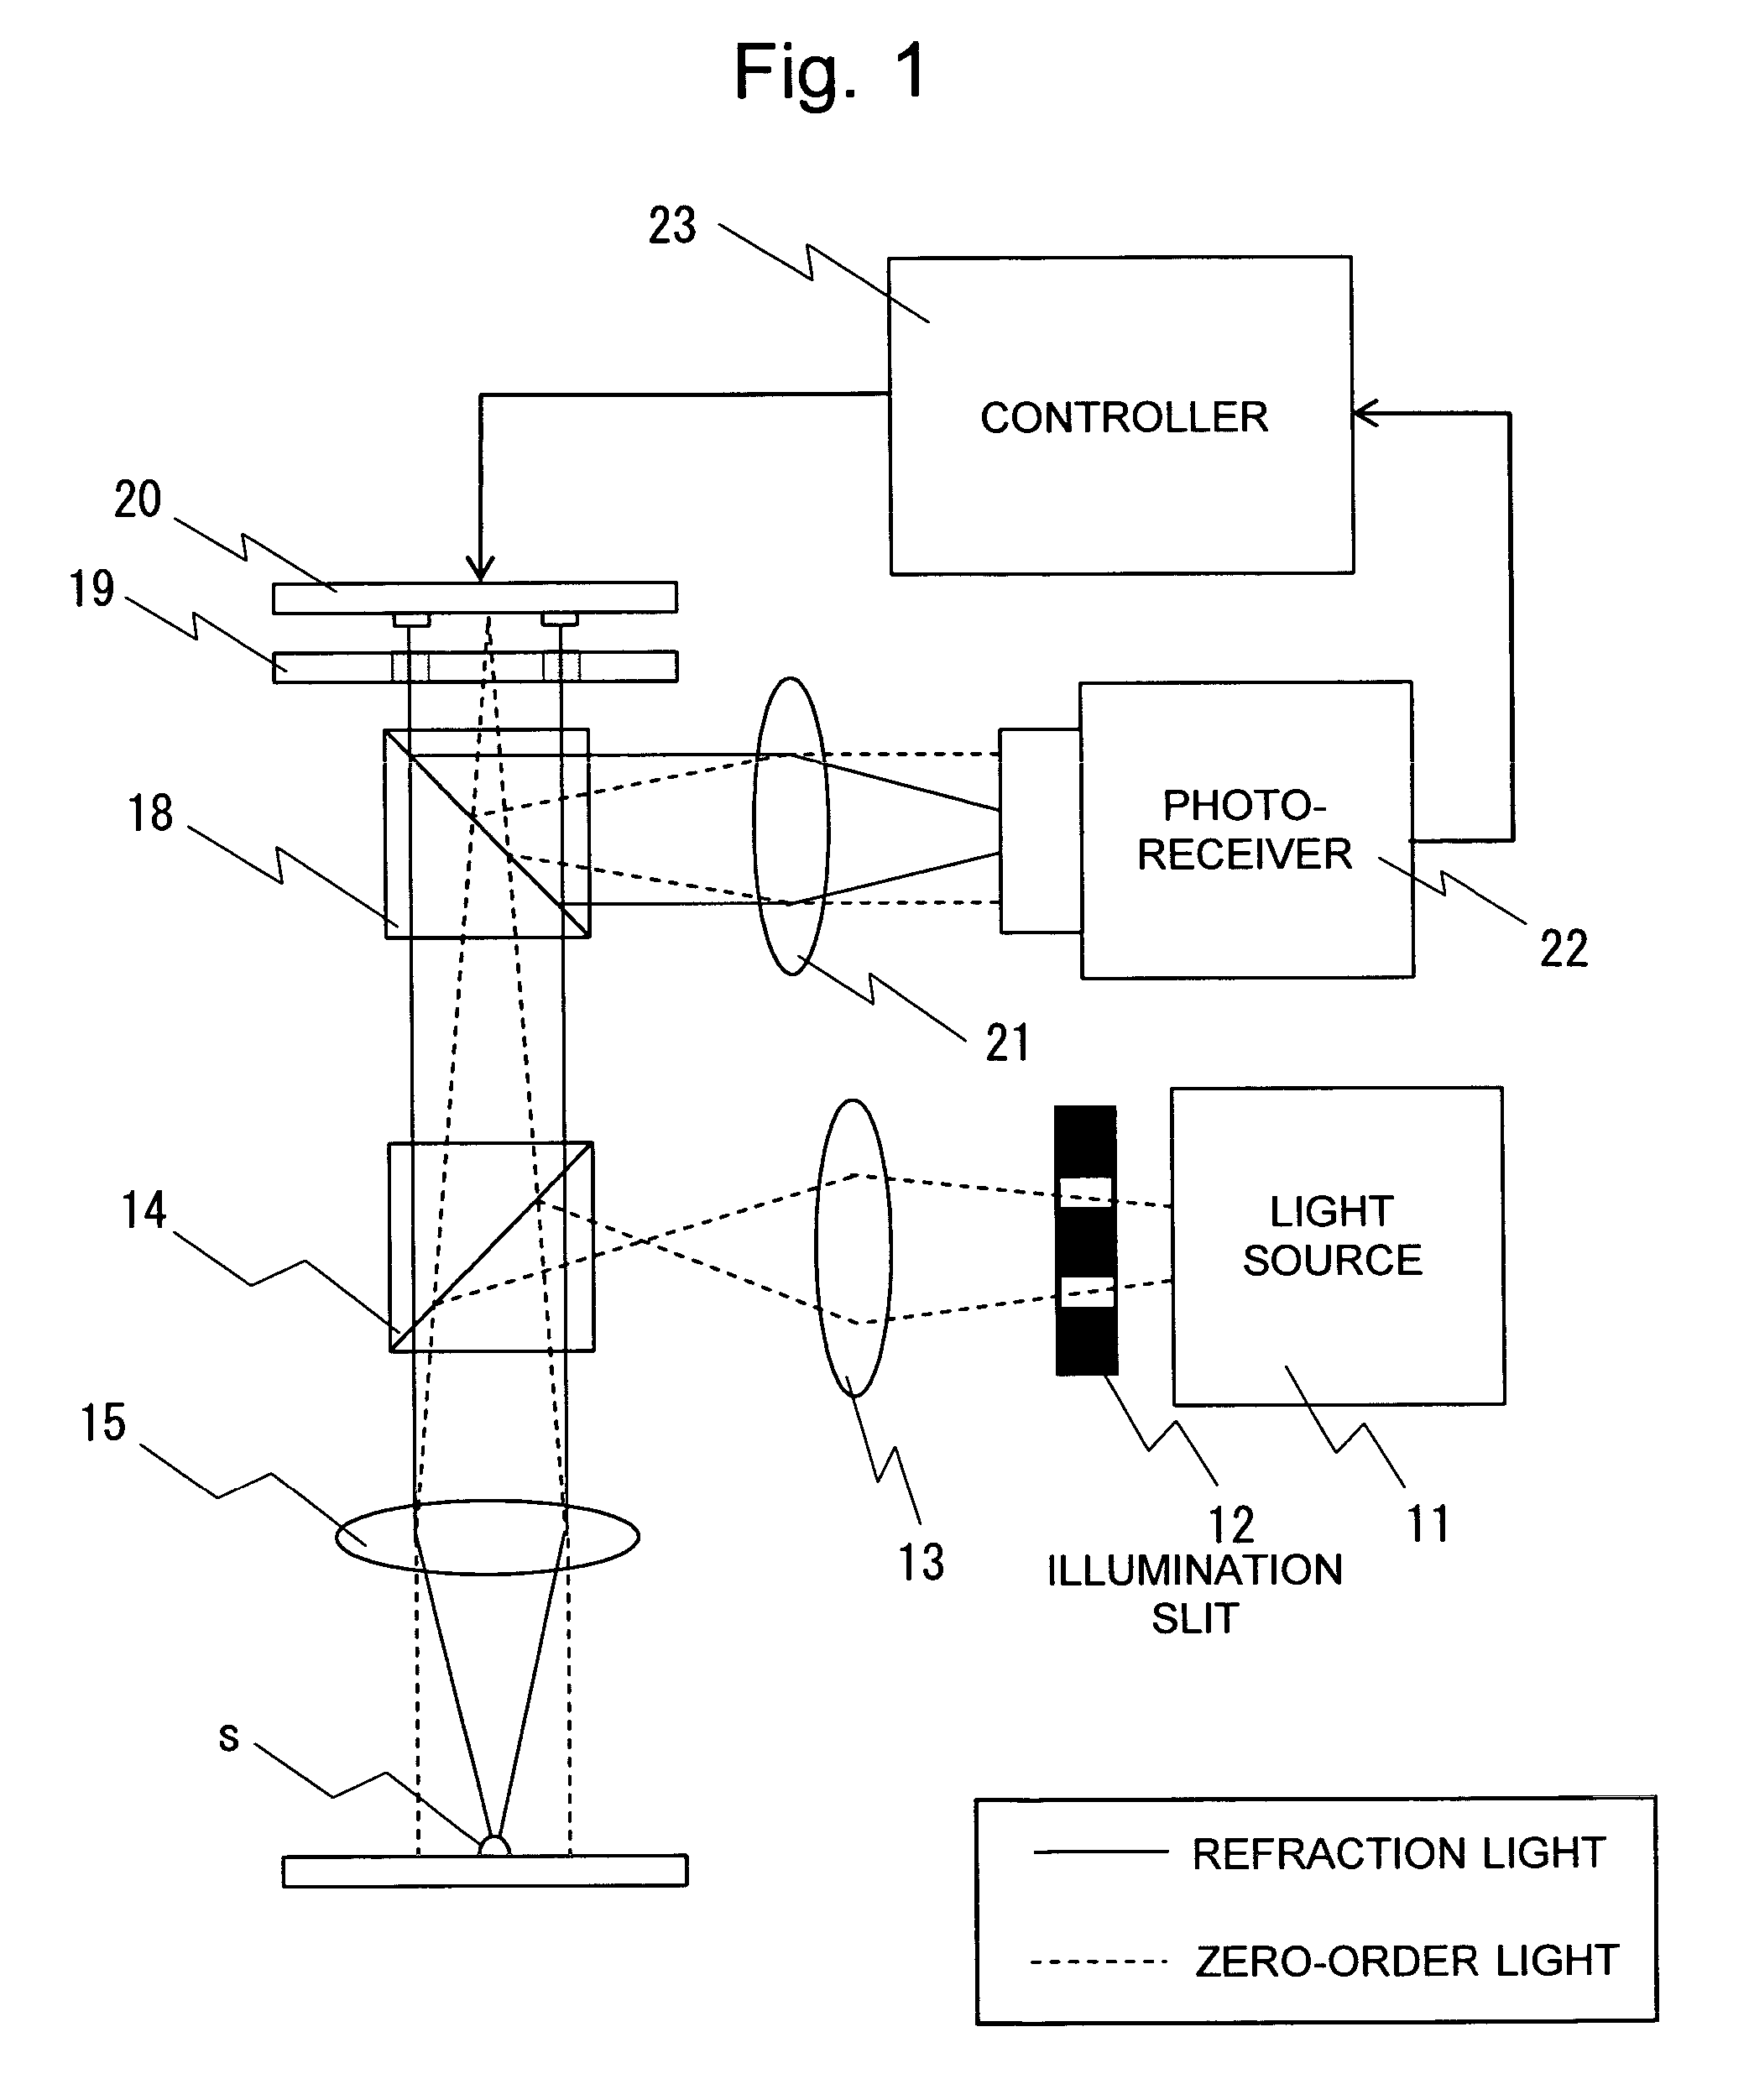 Three-dimensional geometric measurement and analysis system